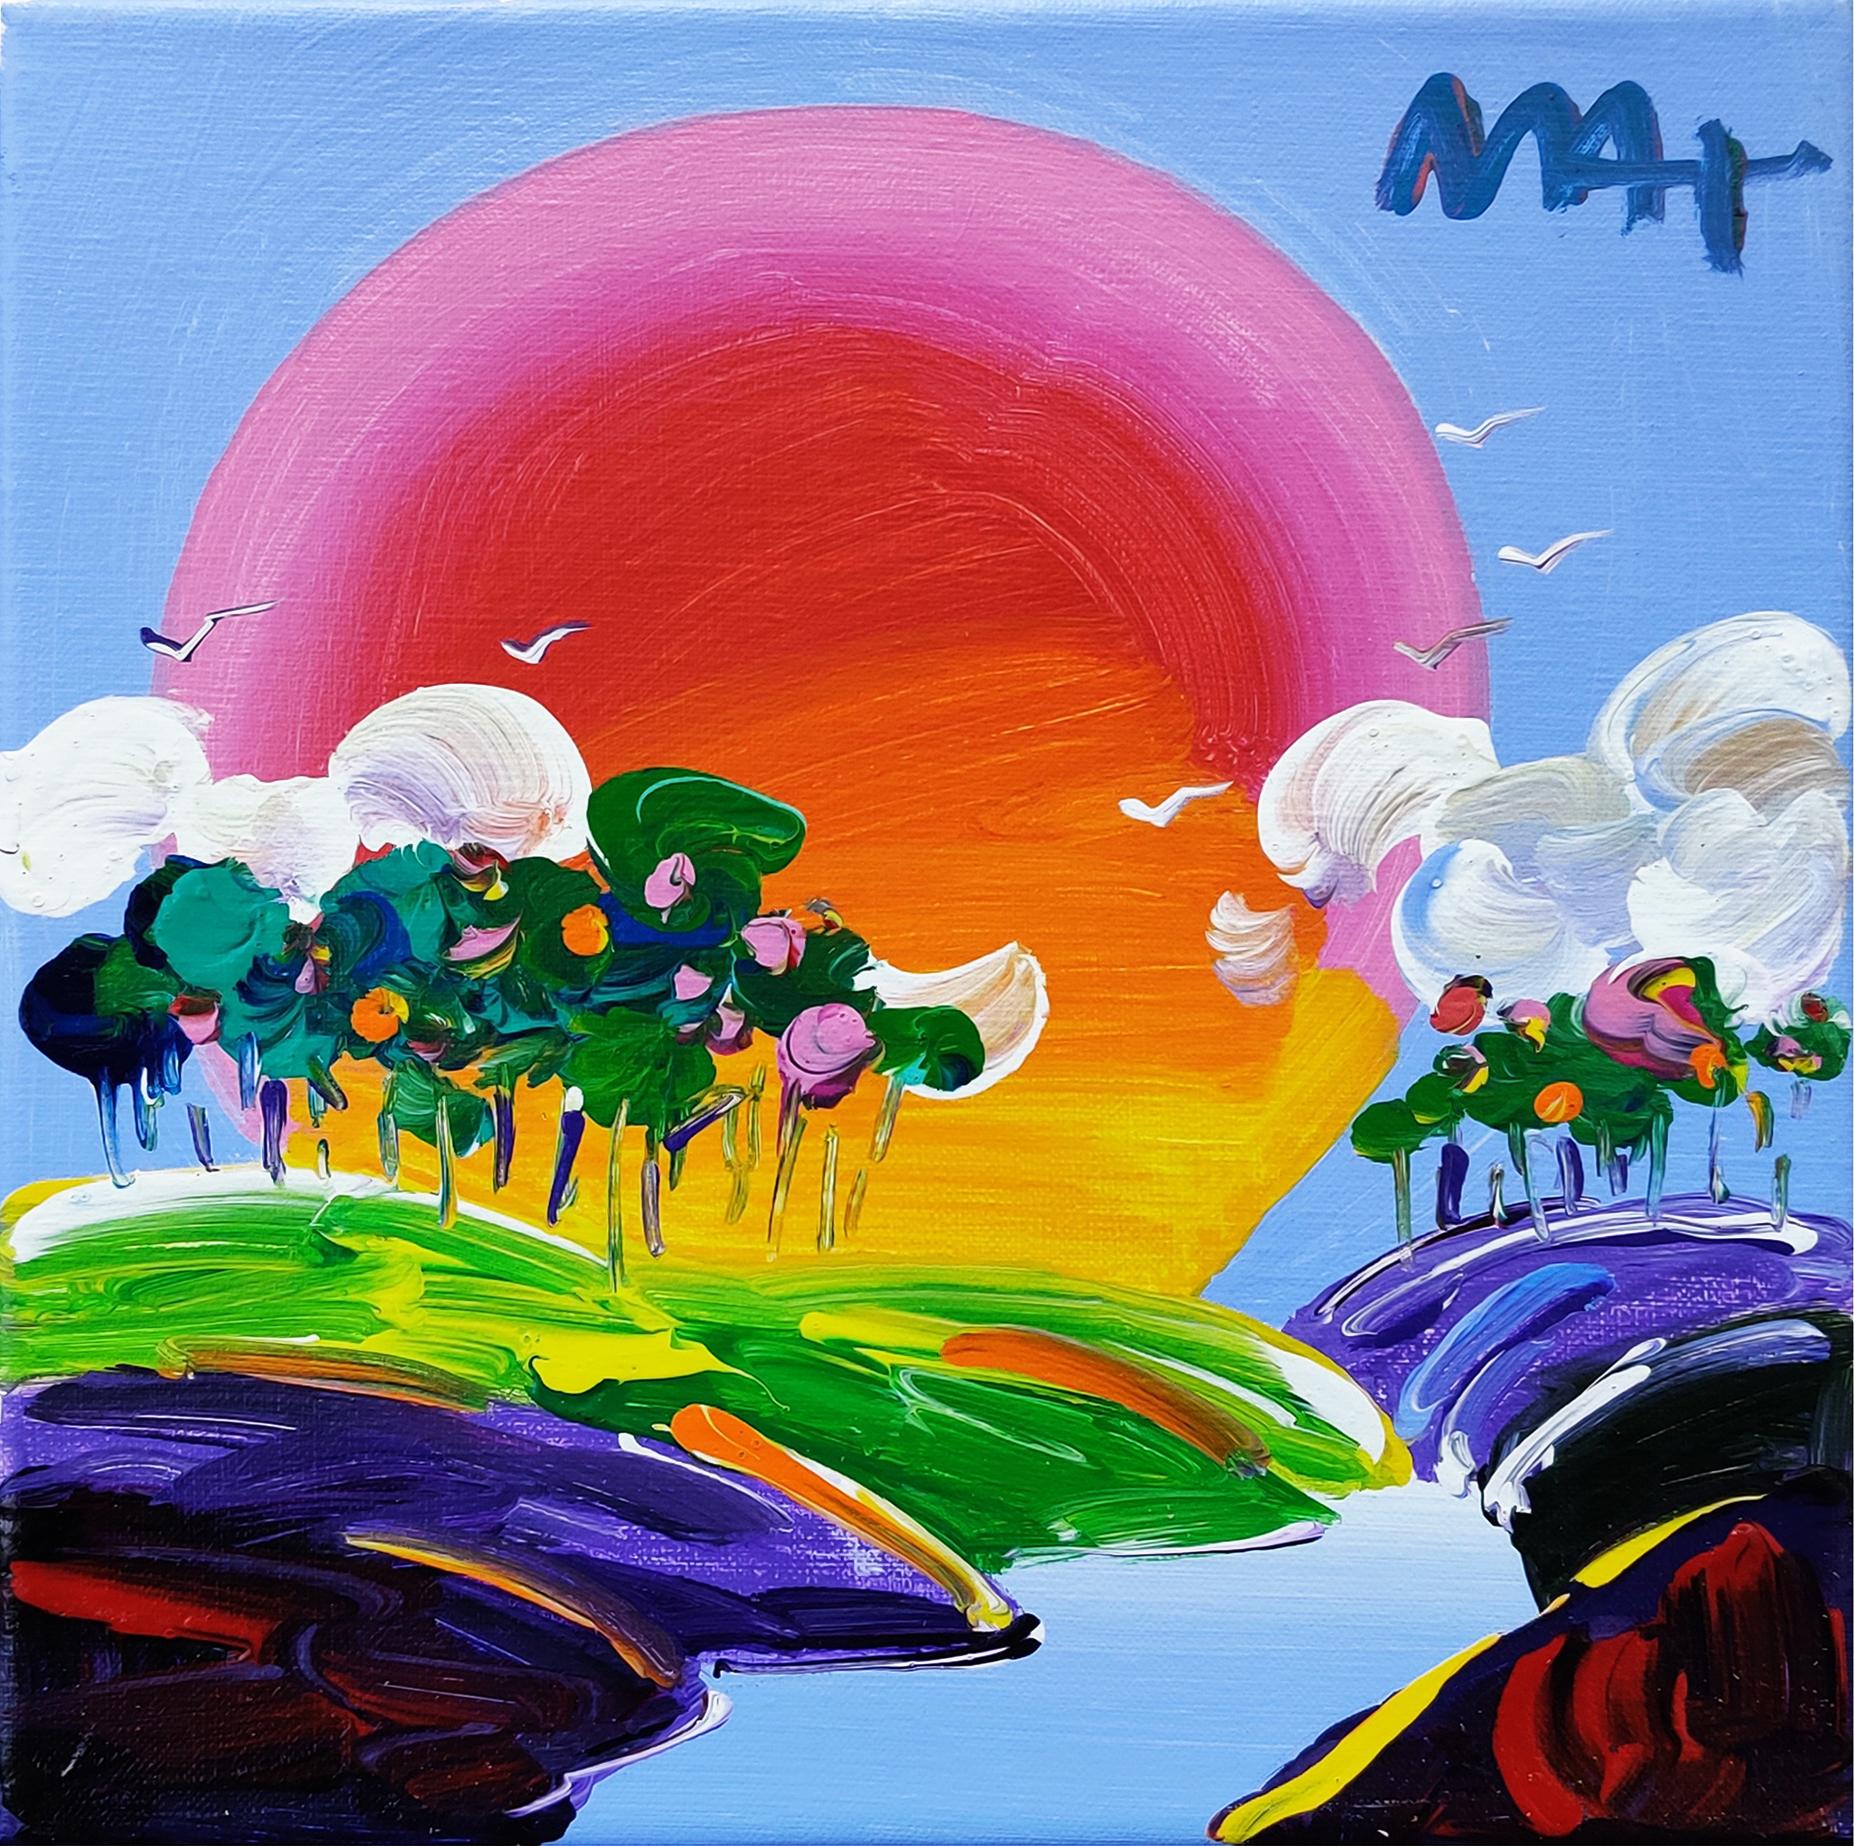 WITHOUT BORDERS - Painting by Peter Max